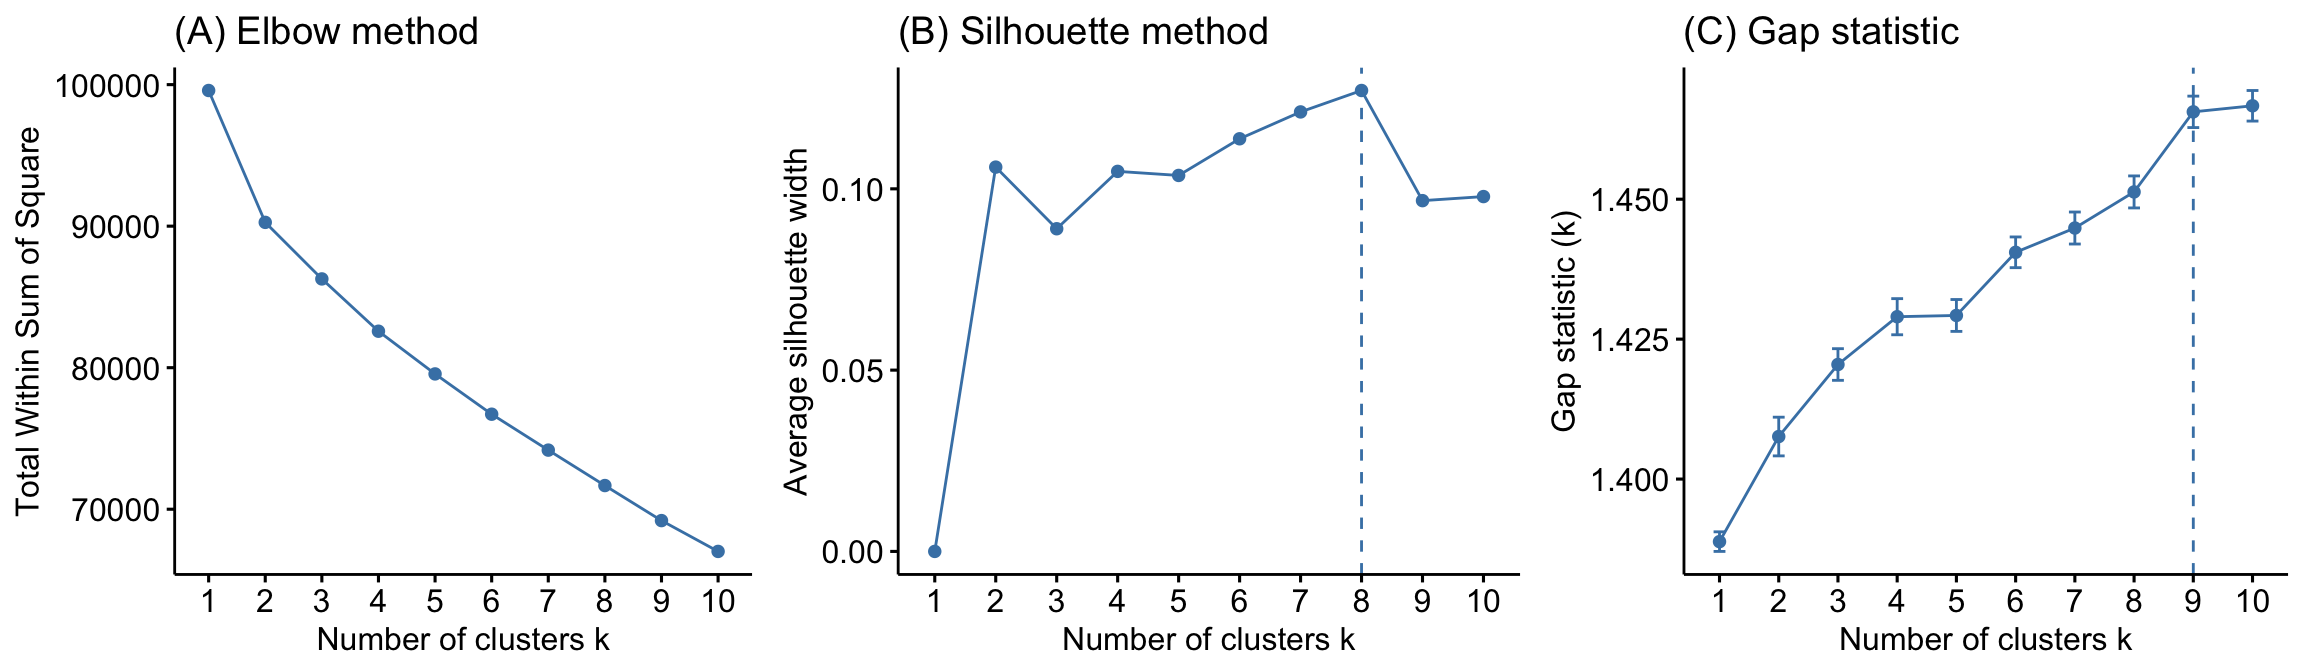 Comparison of three different methods to identify the optimal number of clusters.